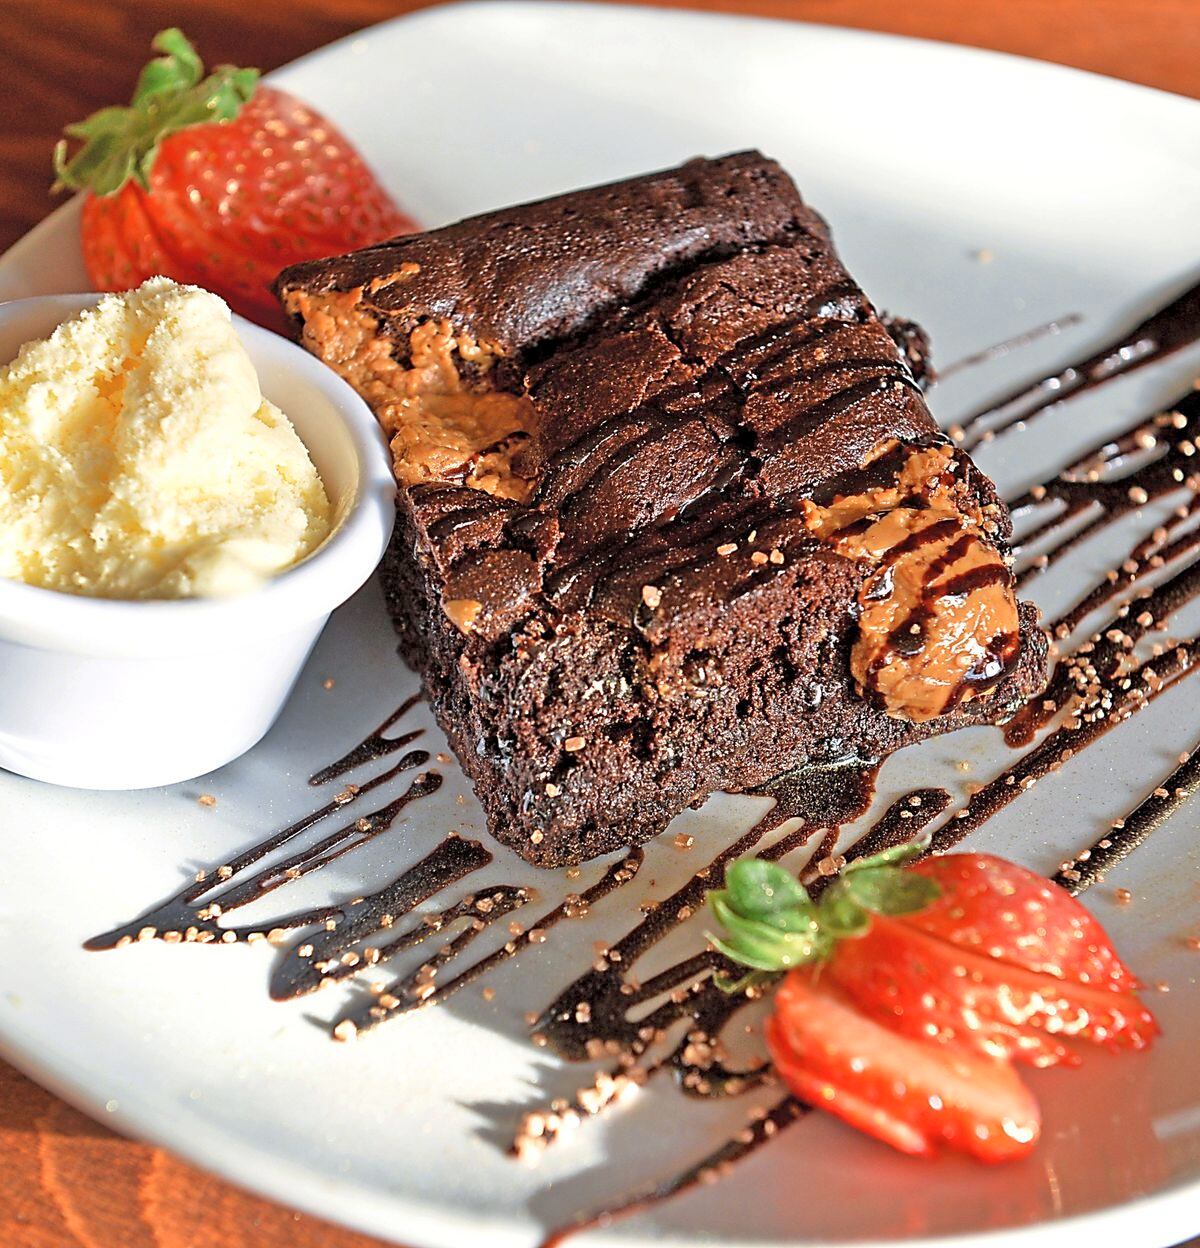 Peanut butter and chocolate brownie